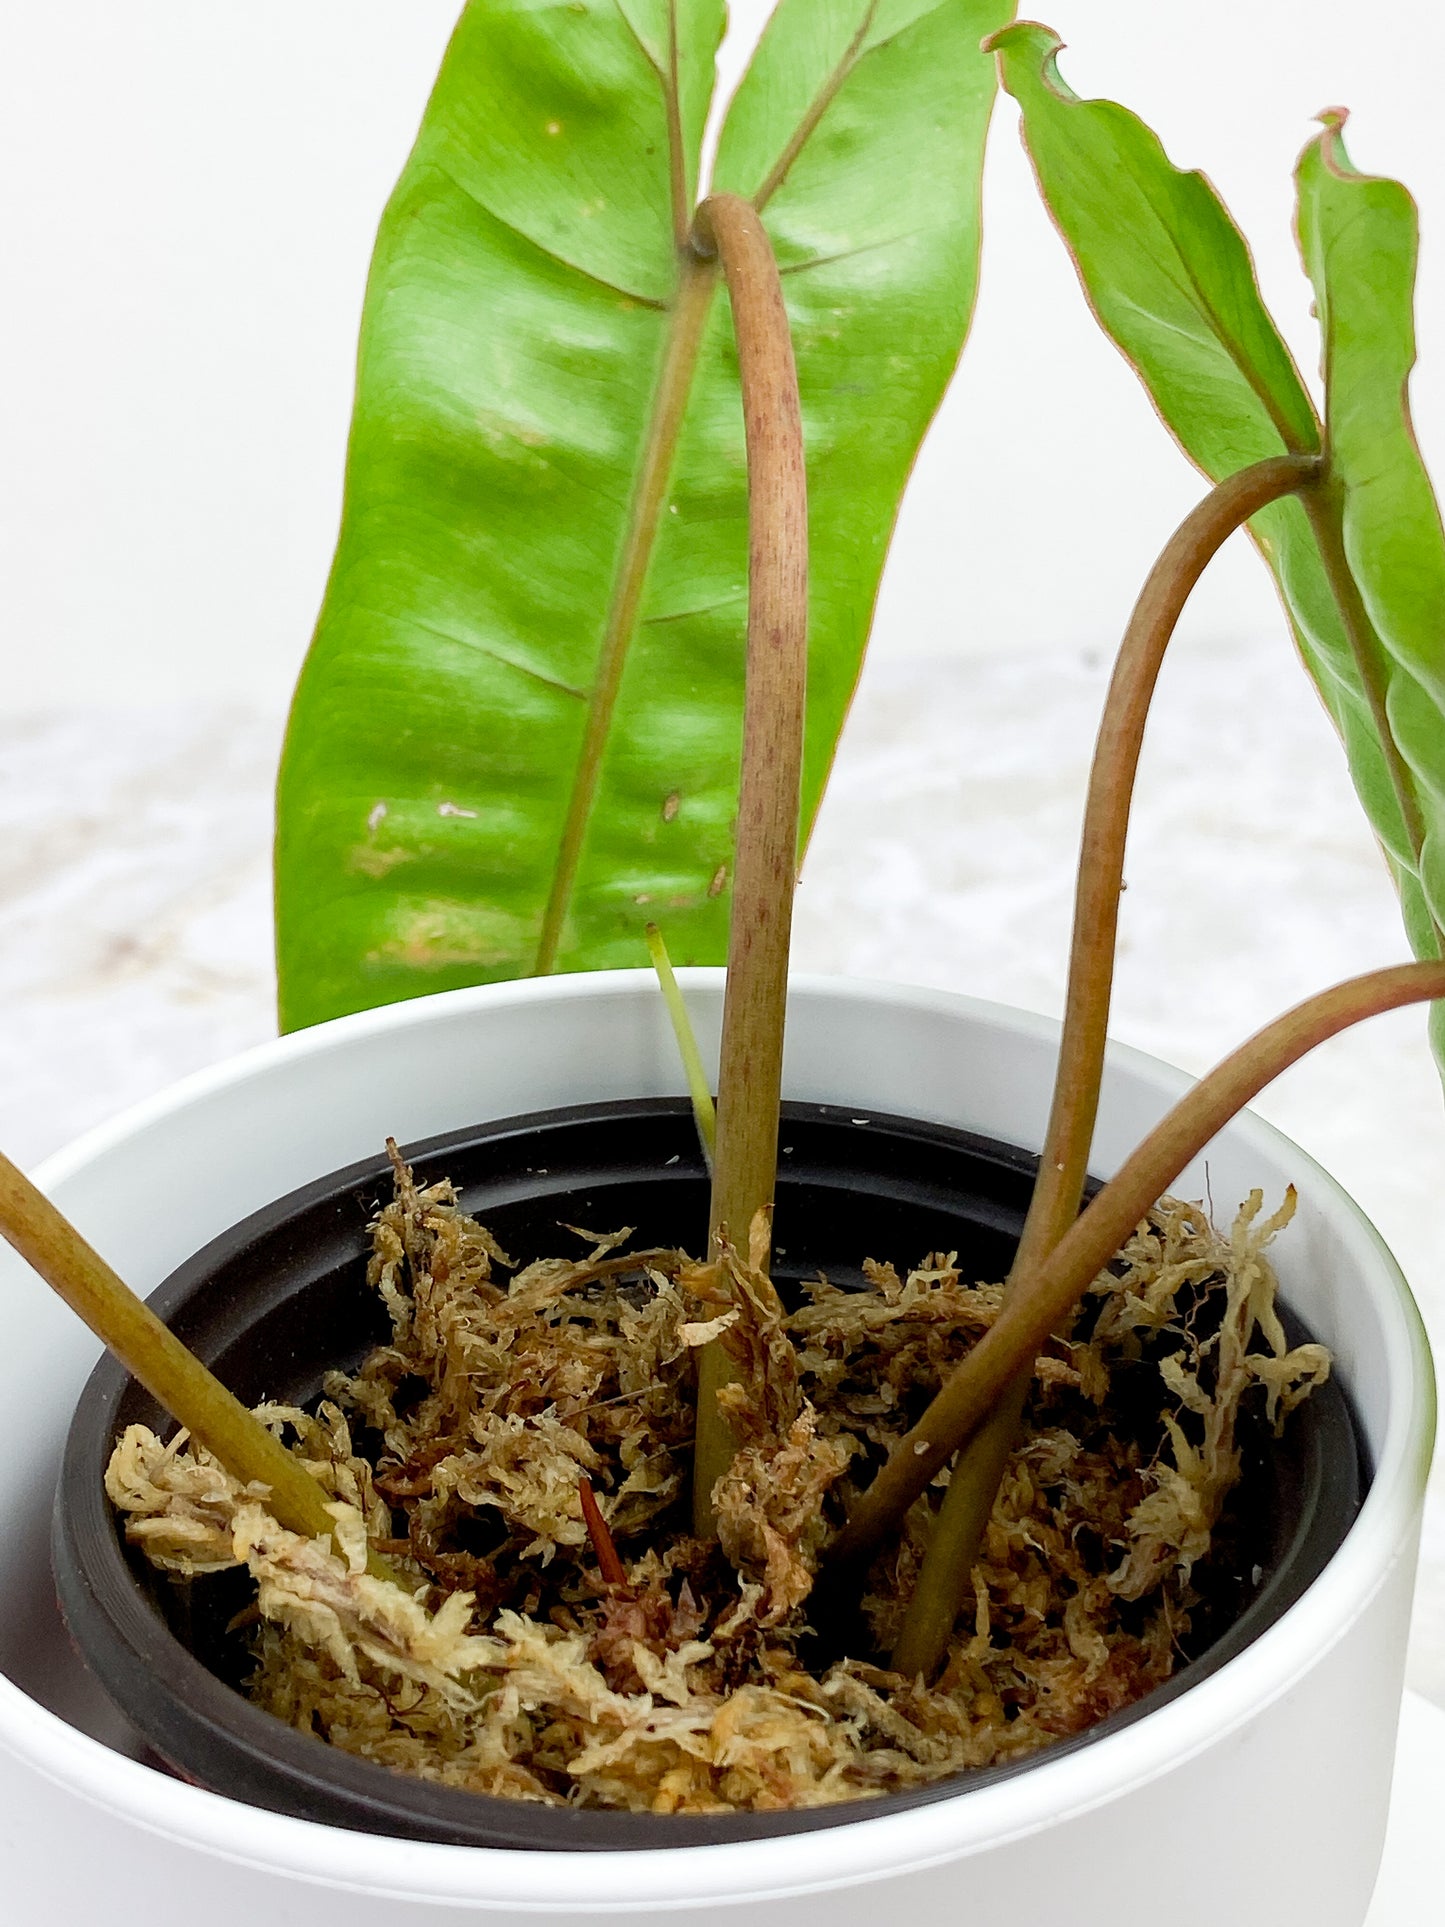 Philodendron Billietiae 4 leaves and 1 sprout